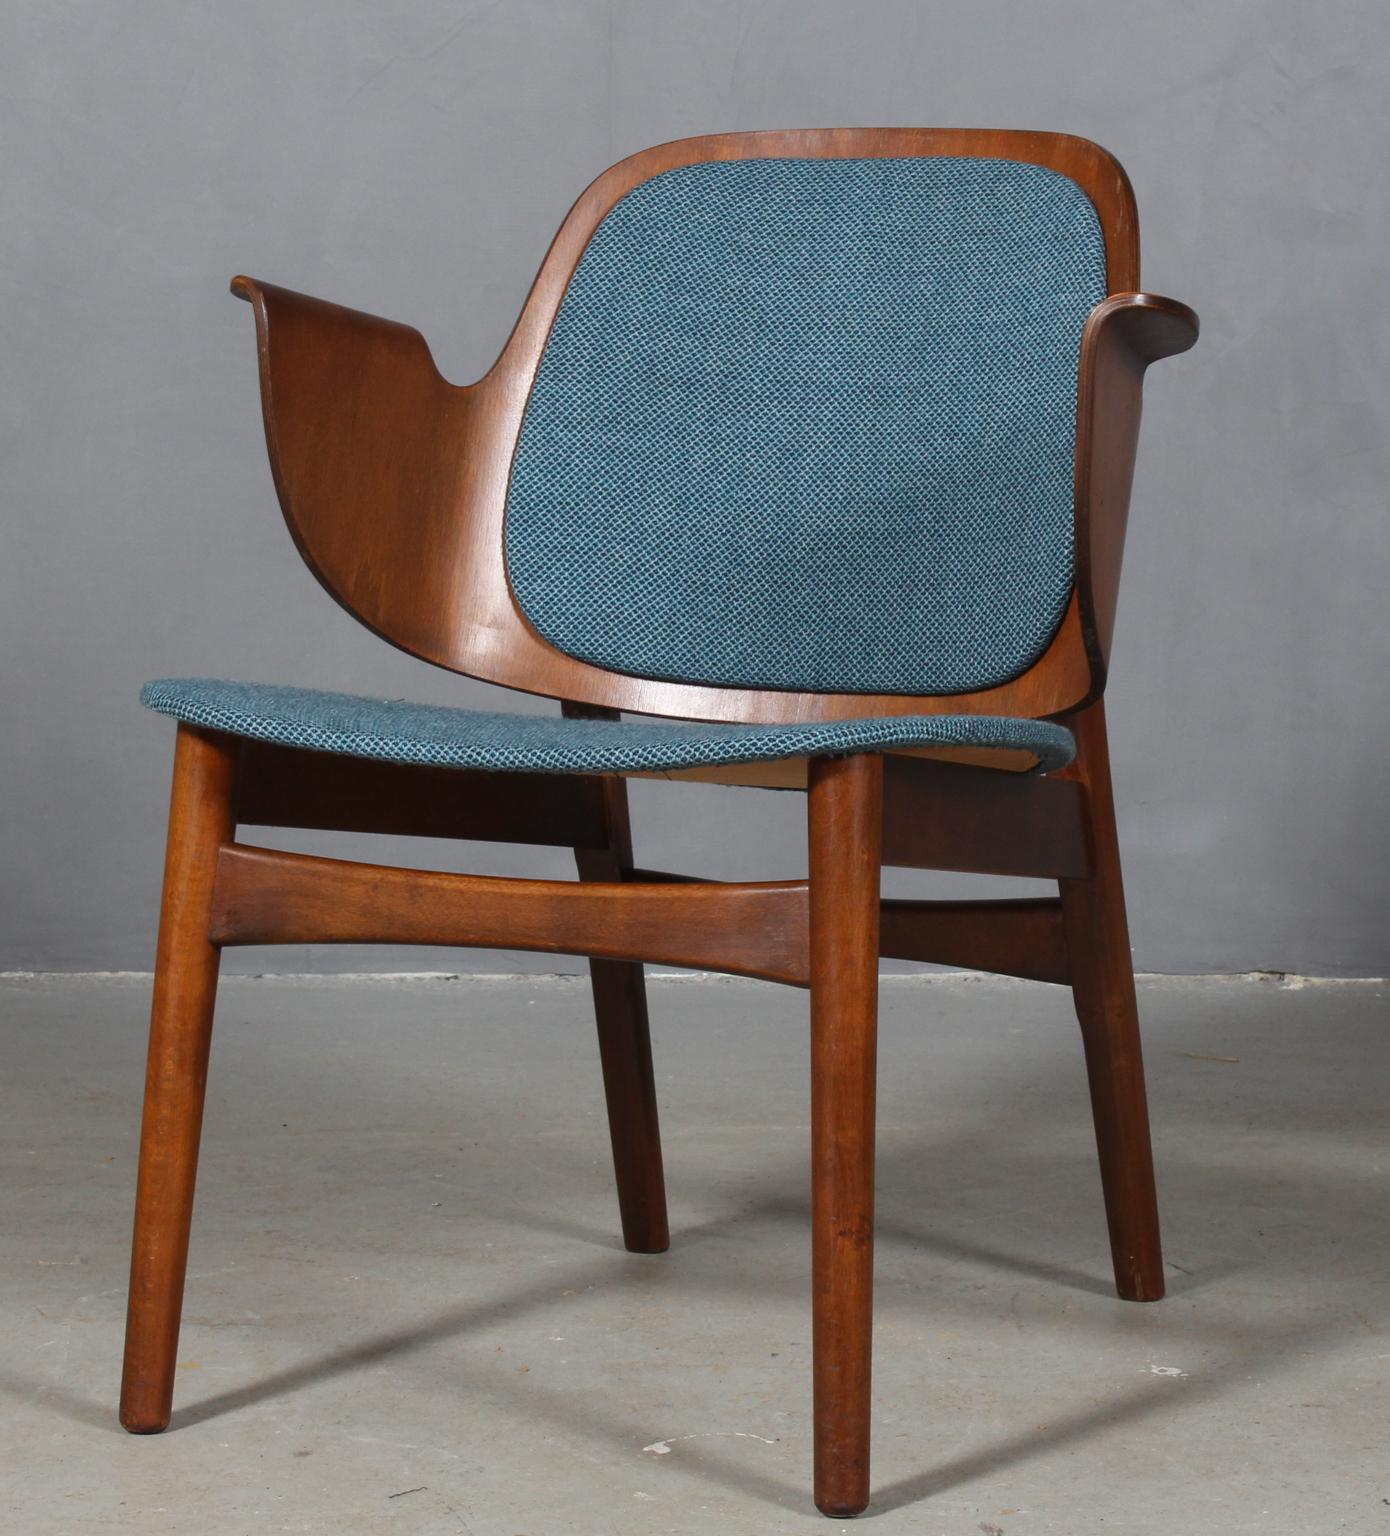 Hans Olsen armchair with frame of stained beech.

Seat and back upholstered with textured fabric.

Model 107, made by Bramin.